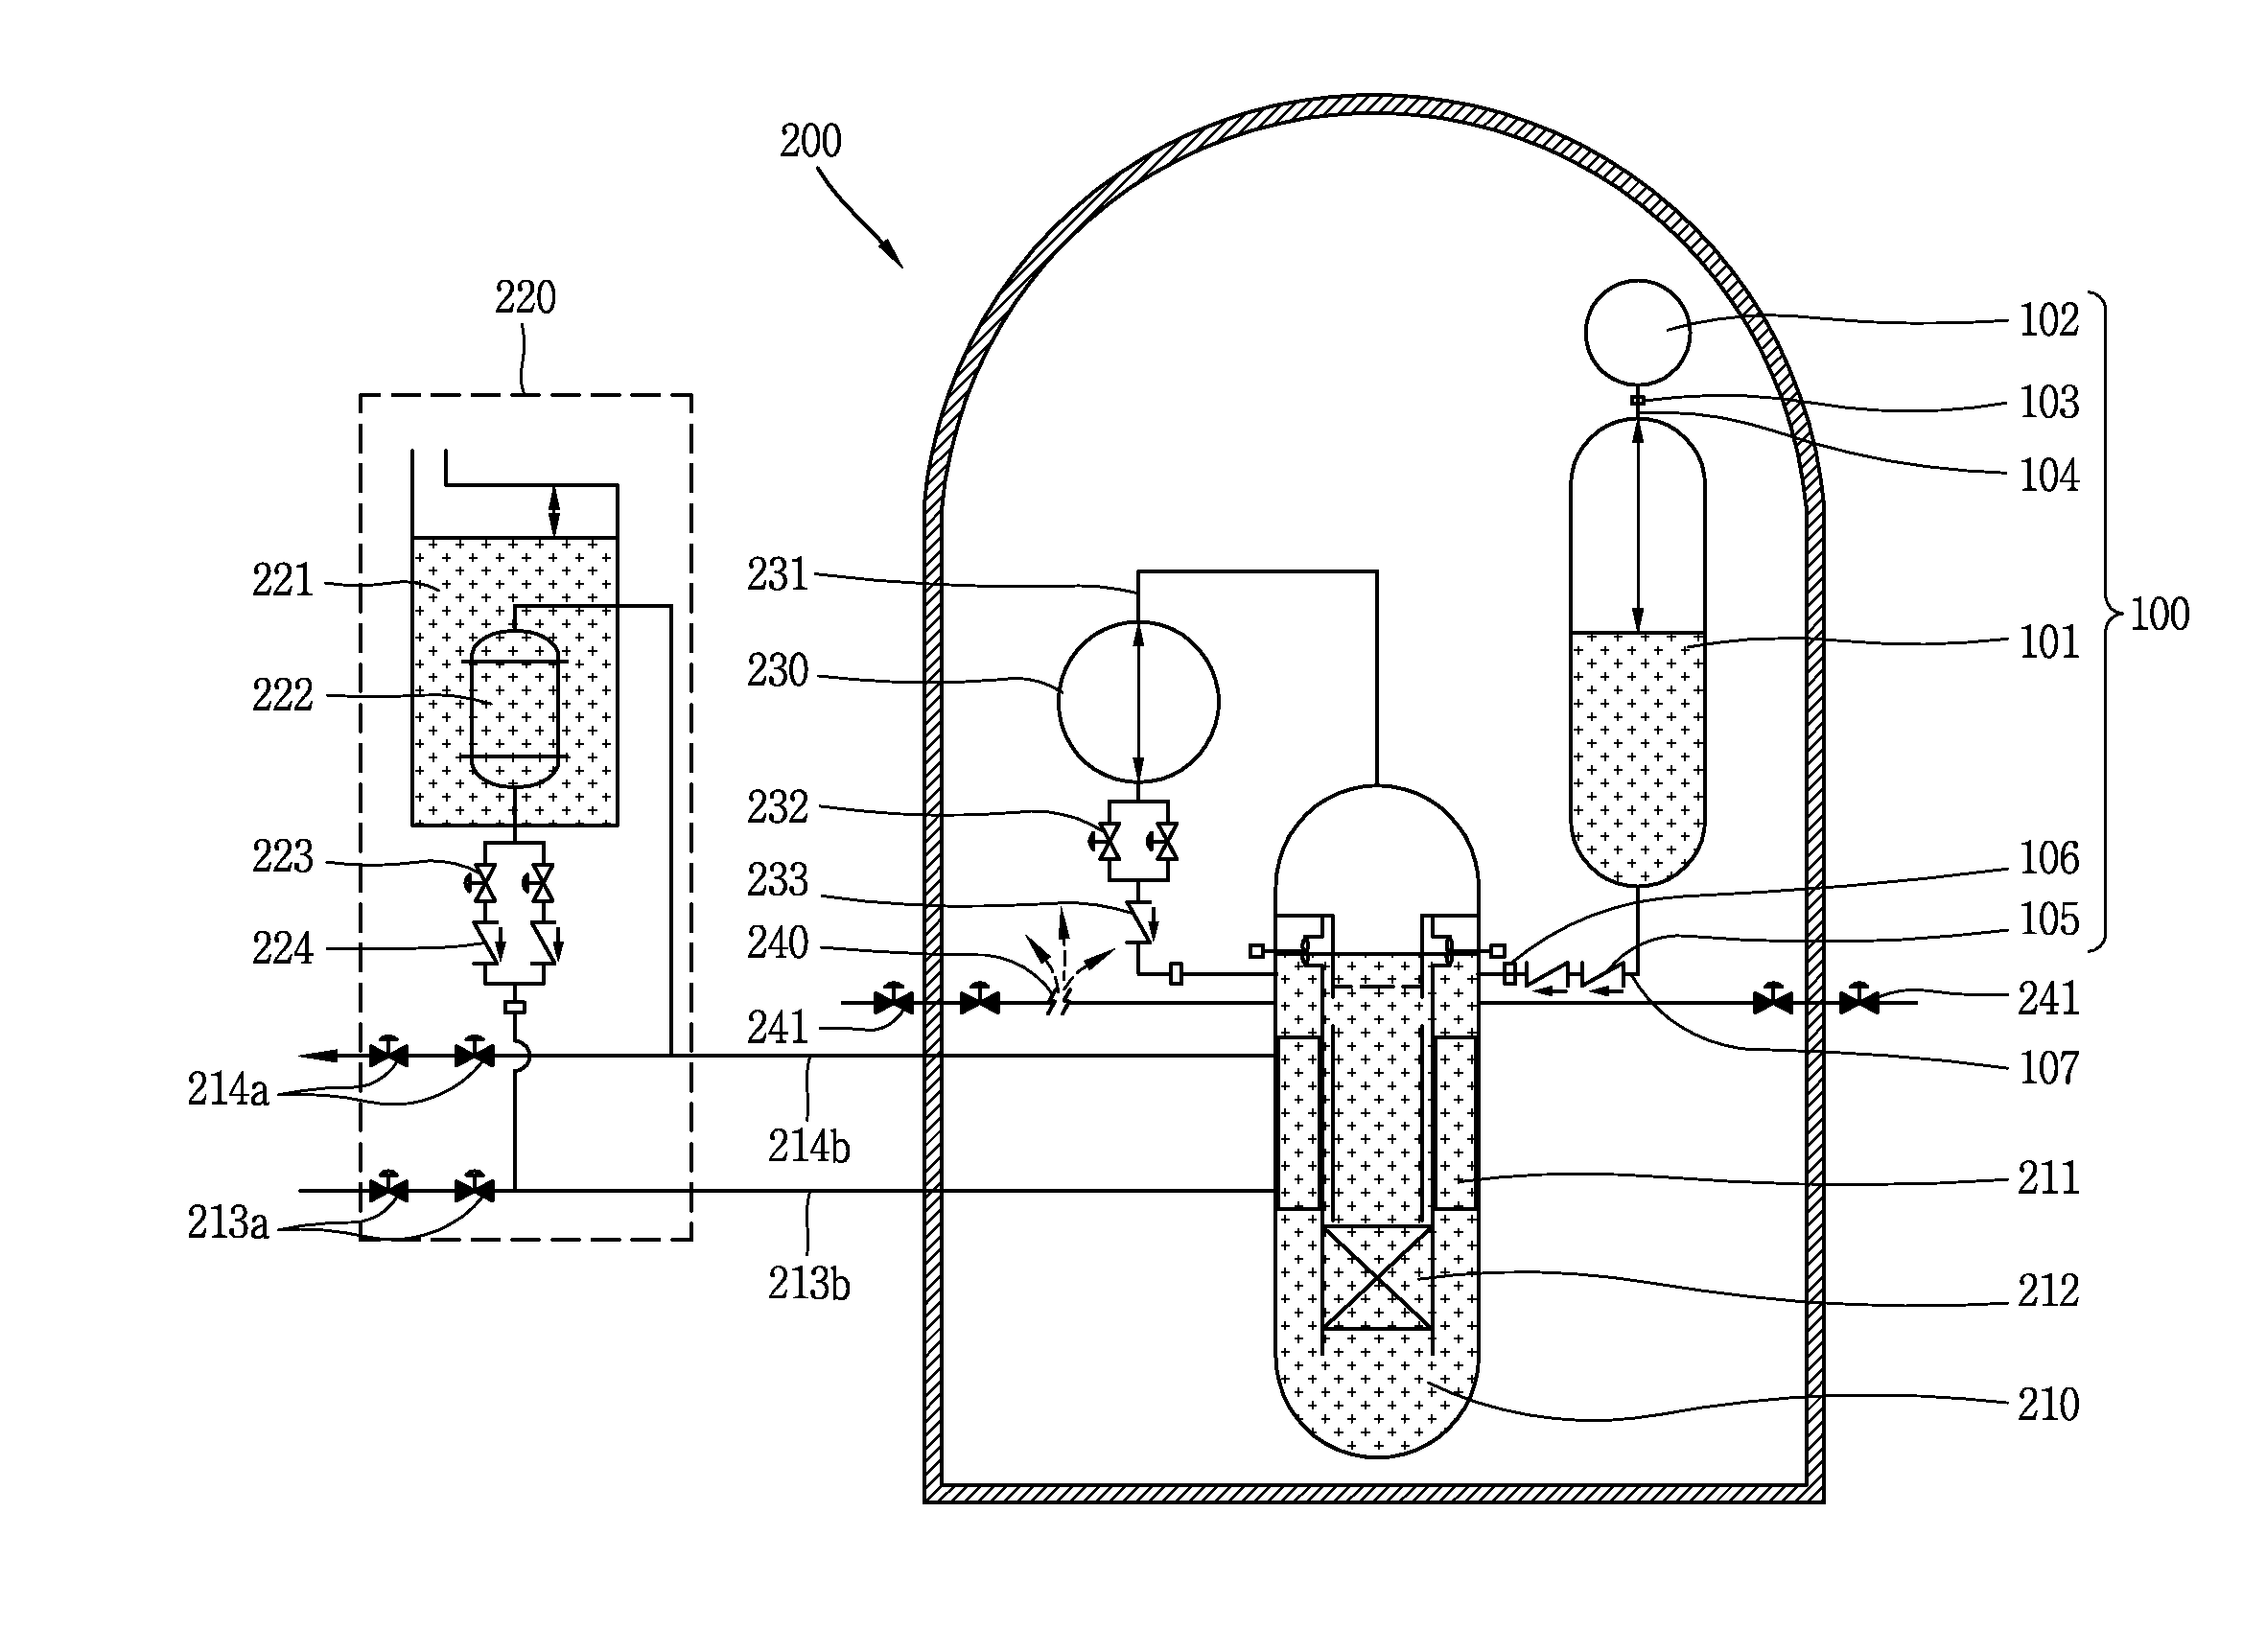 Separate type safety injection tank and integral type reactor having the same